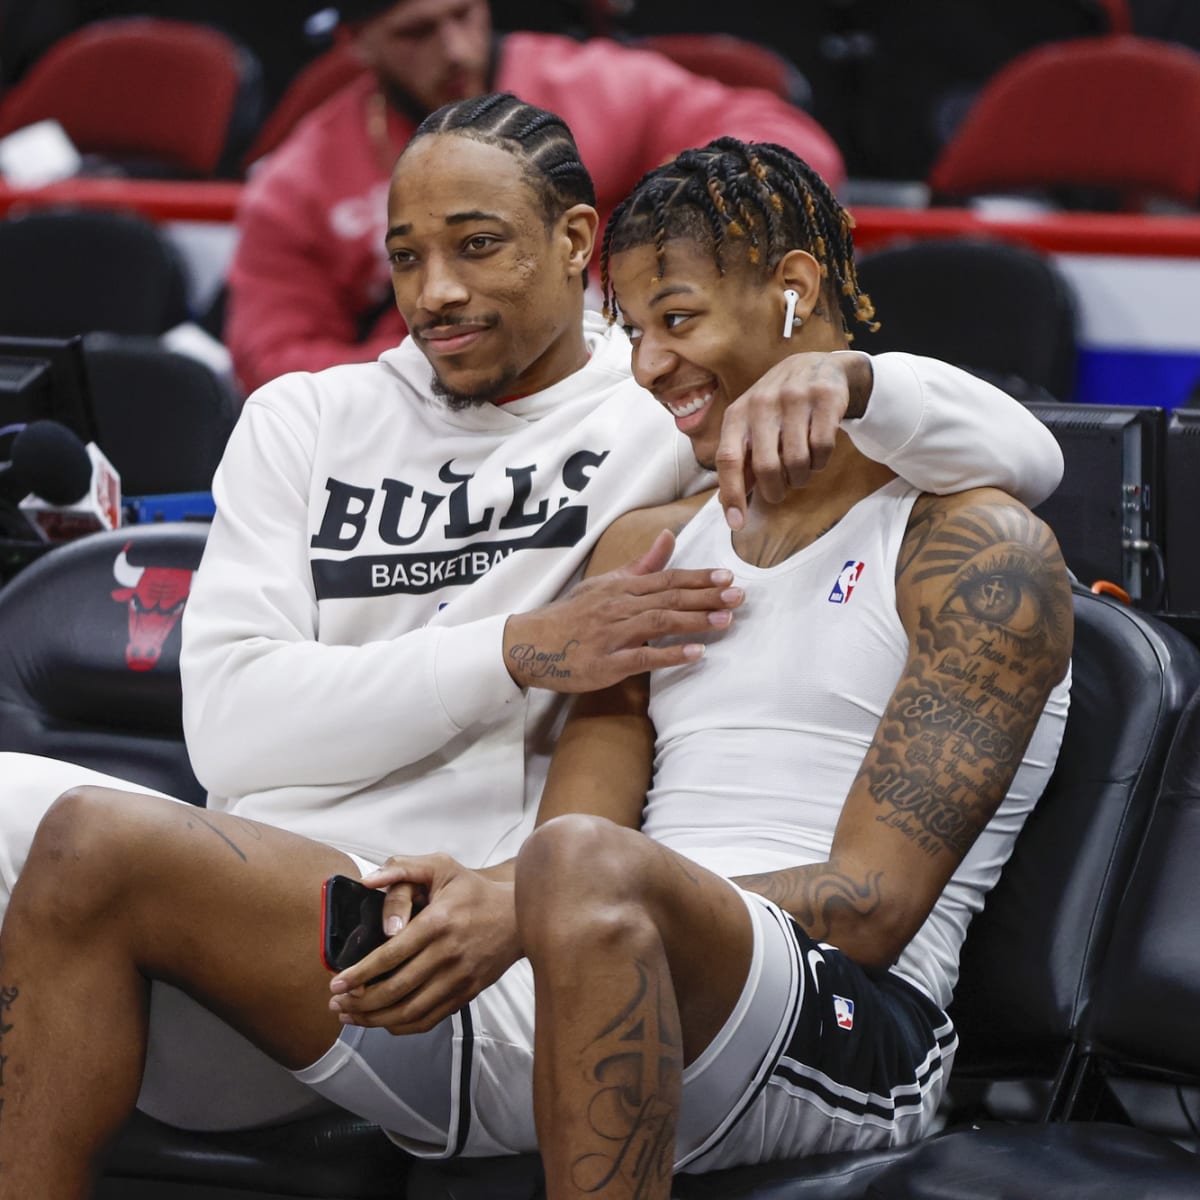 Chicago Bulls Workout Sessions Photo Gallery